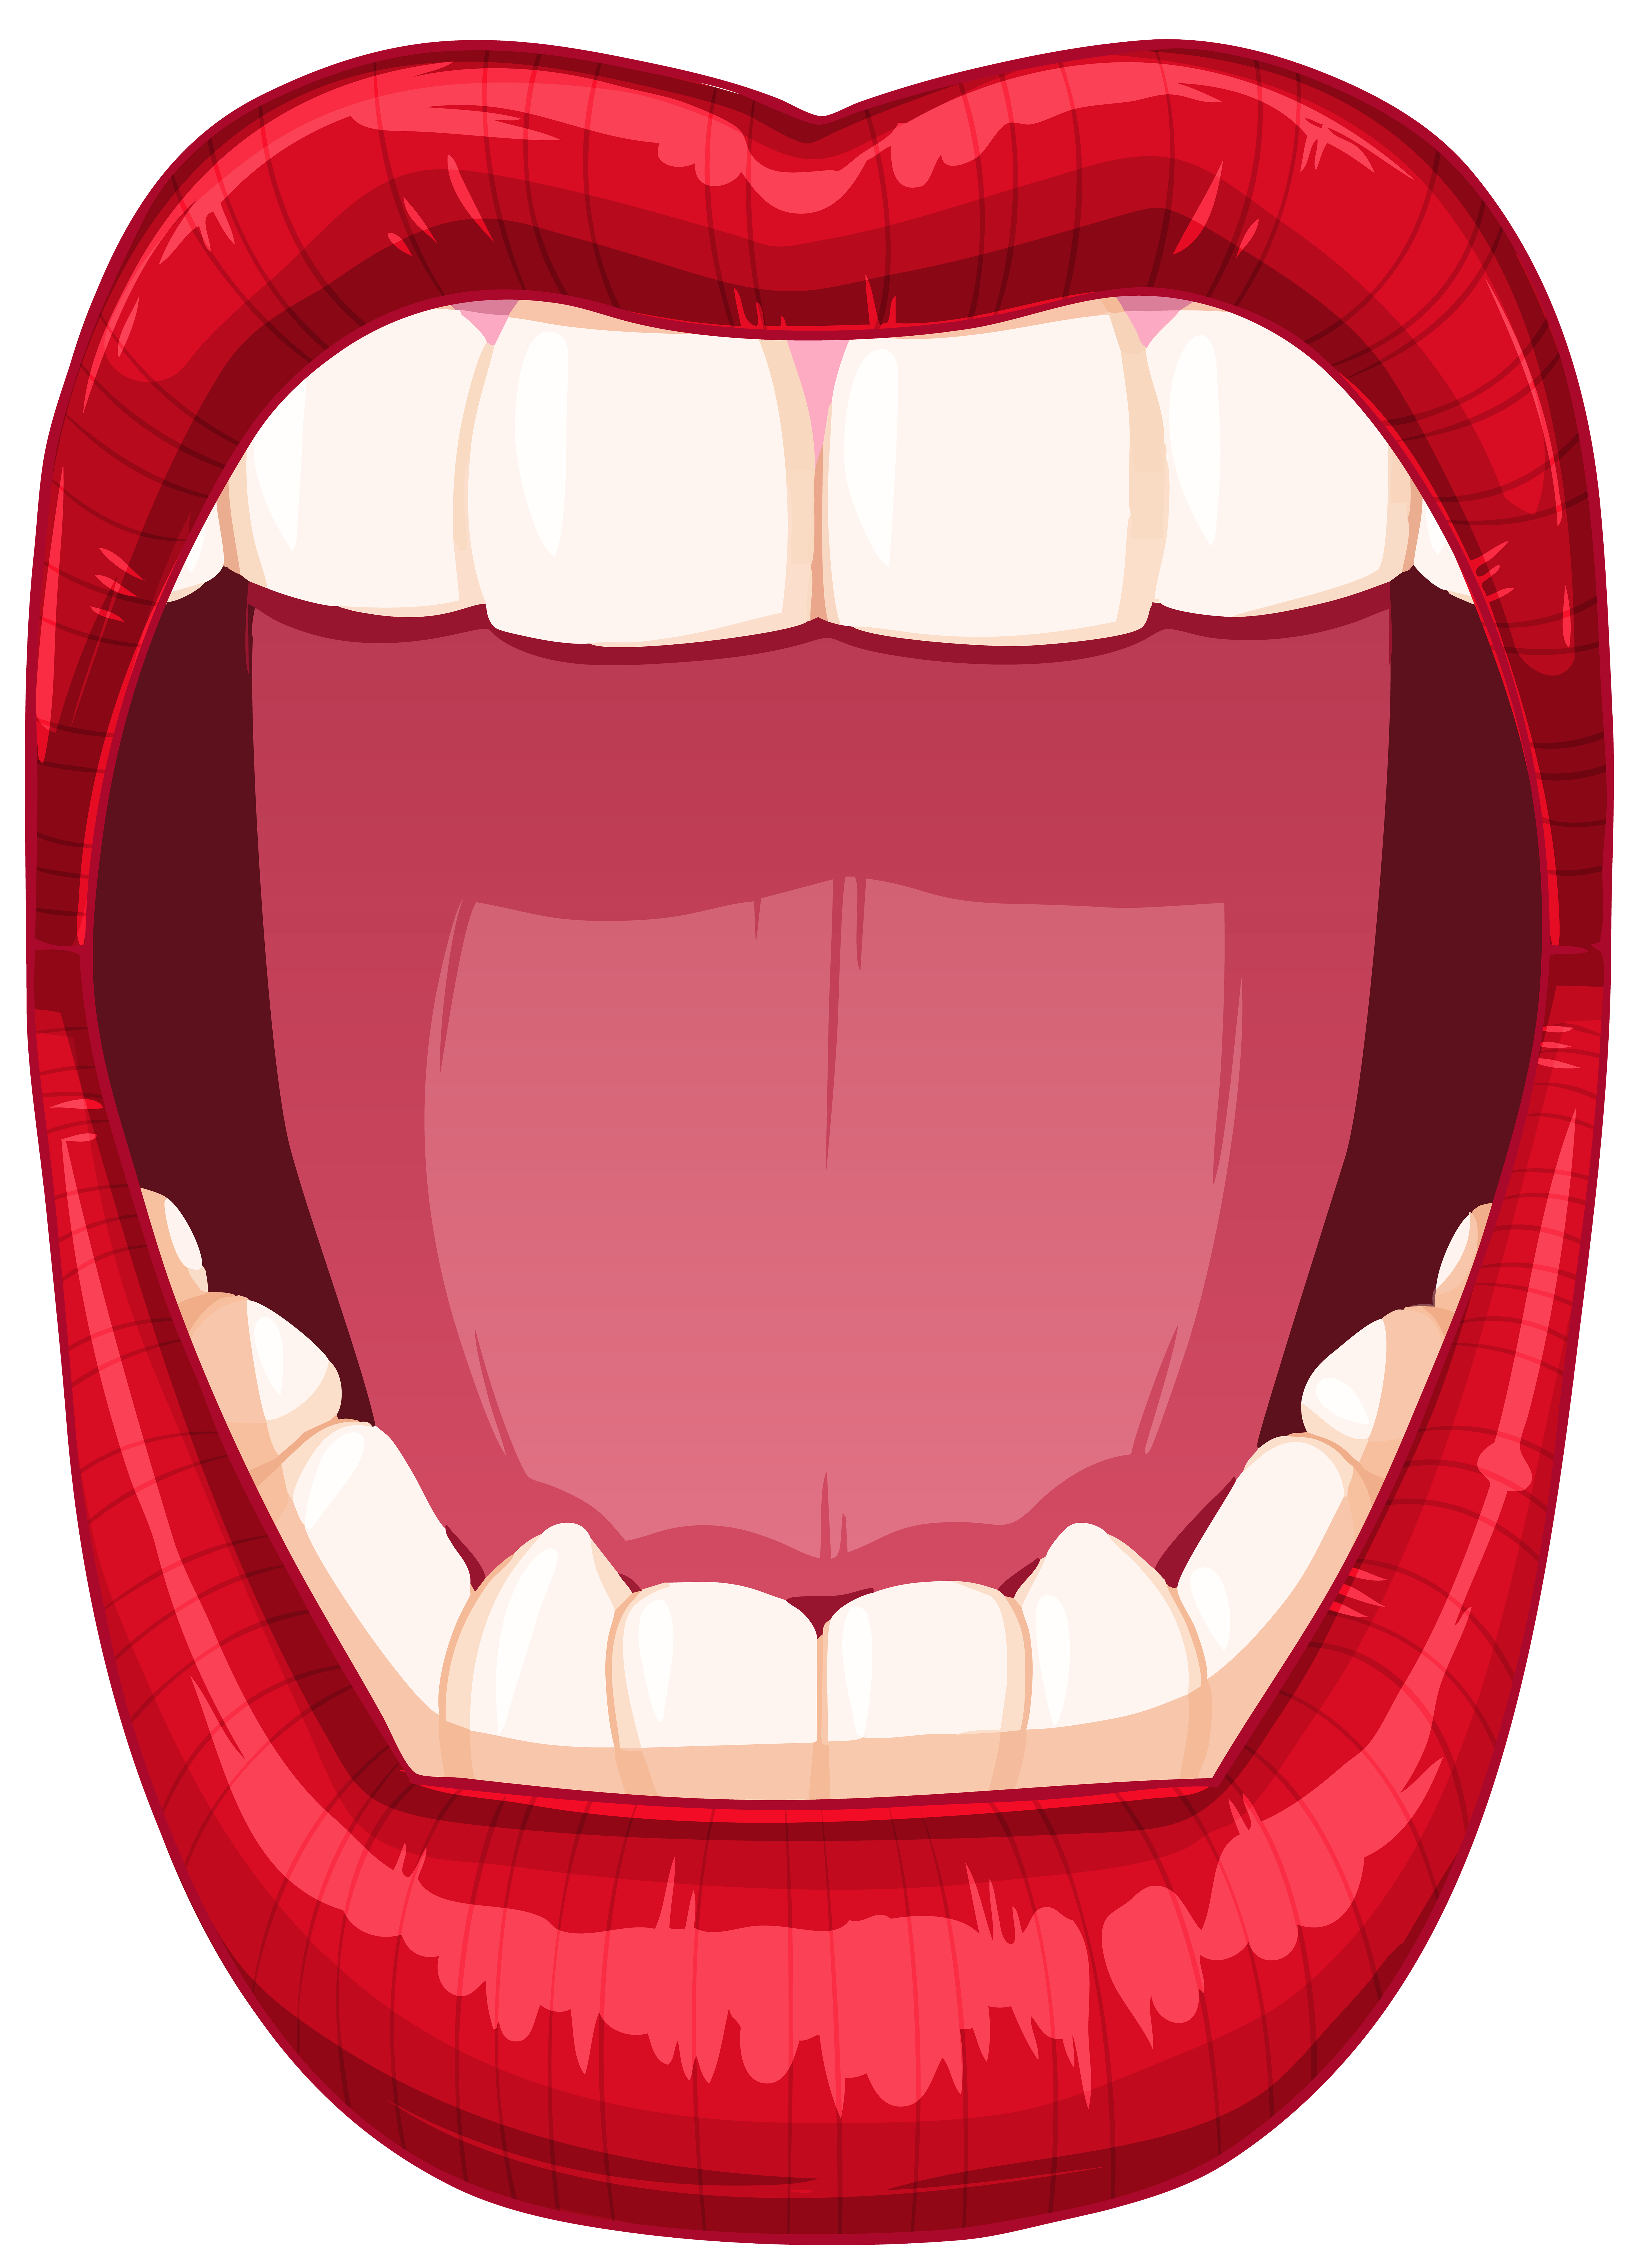 mouth open clipart